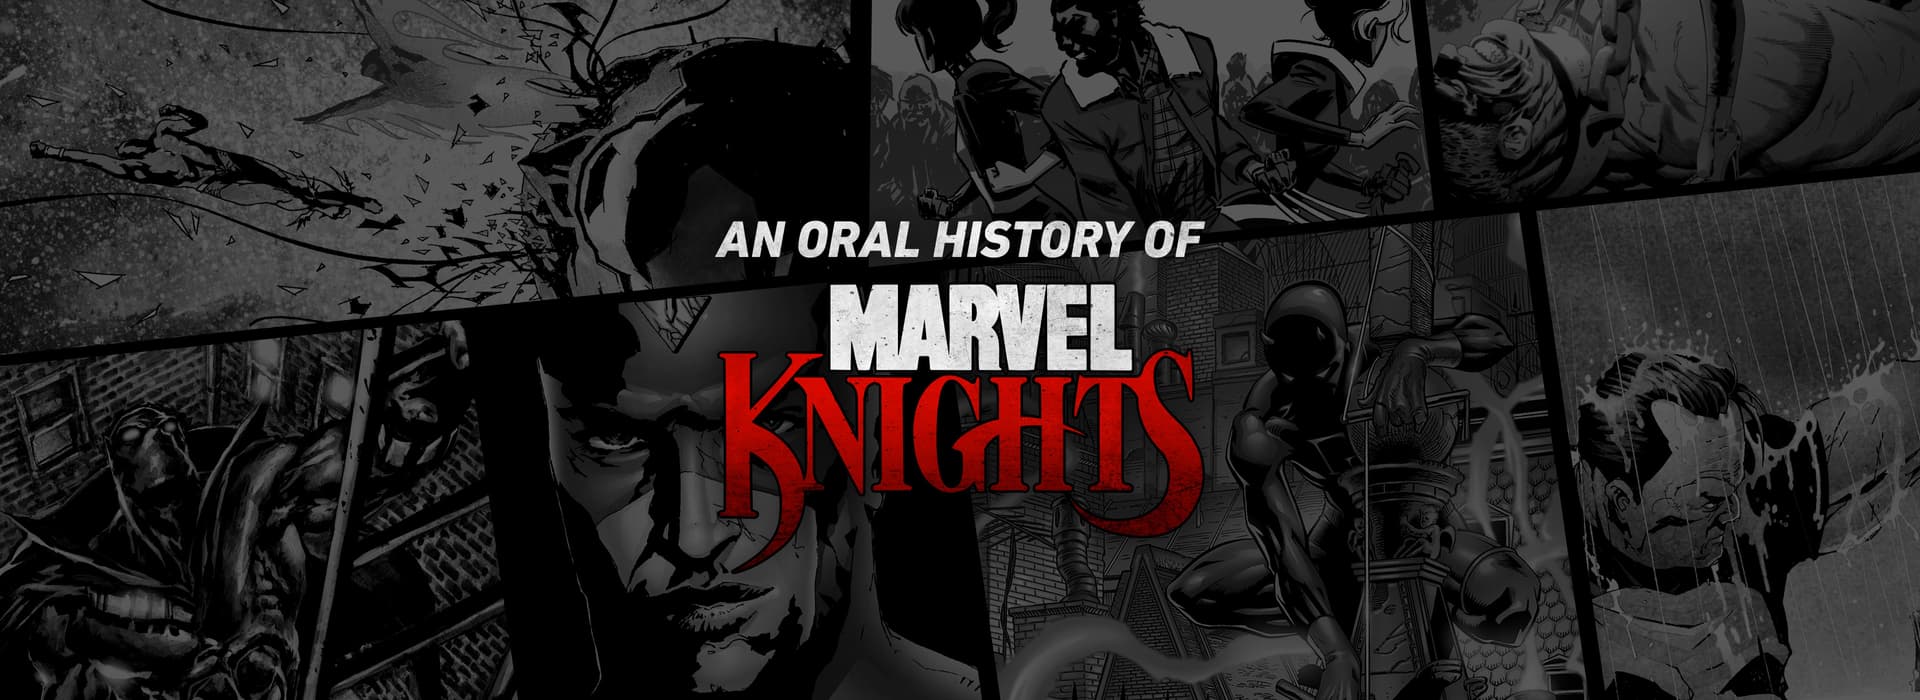 An Oral History of Marvel Knights